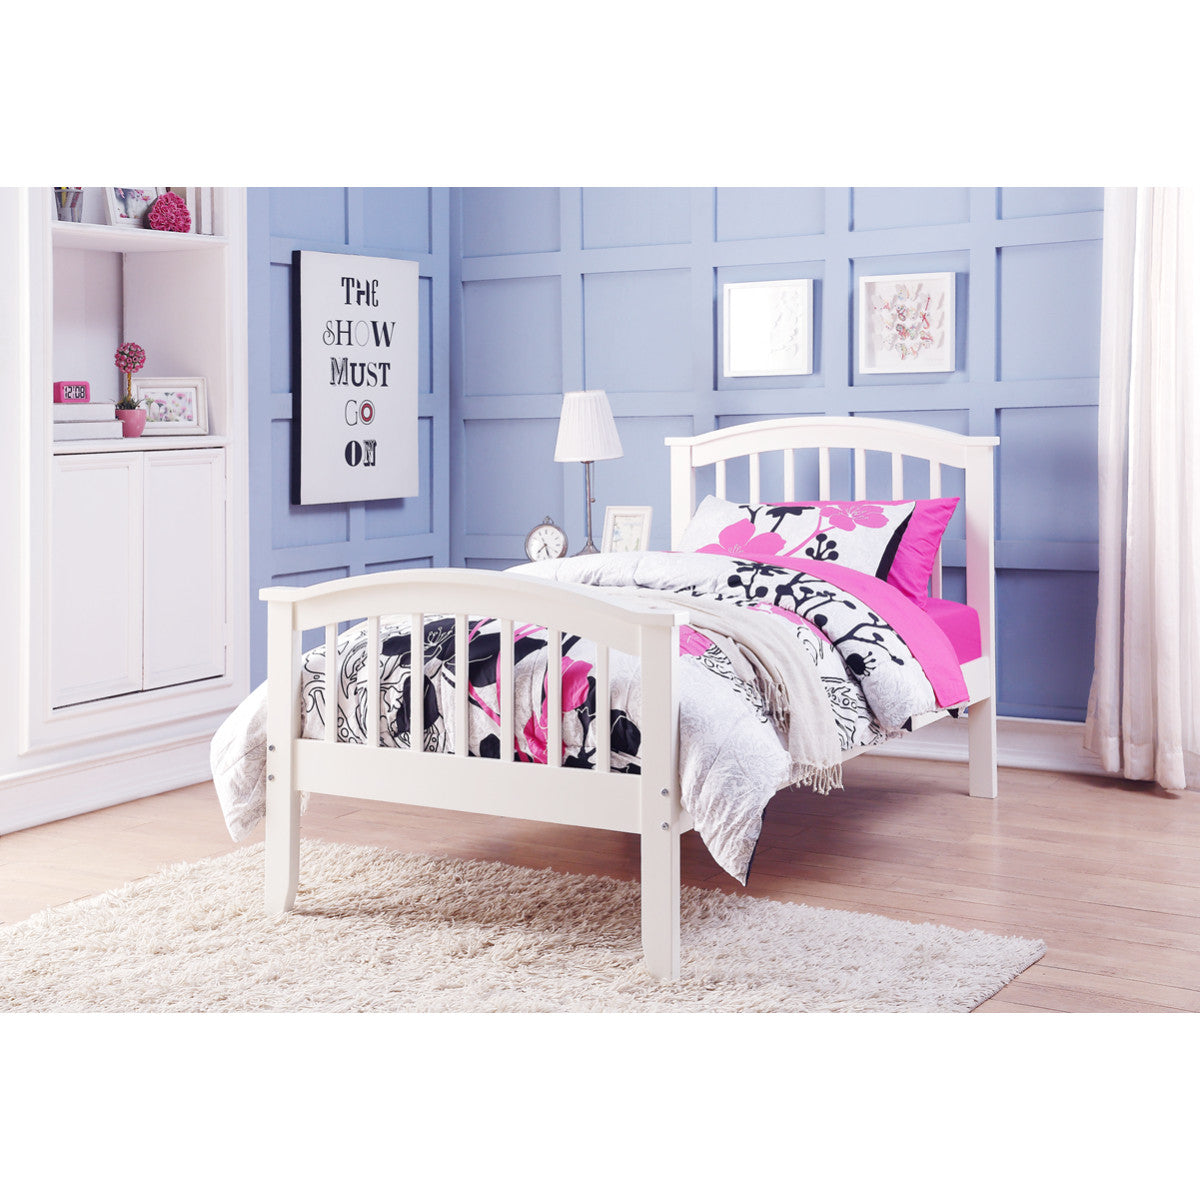 TWIN COLUMBIA BED WHITE